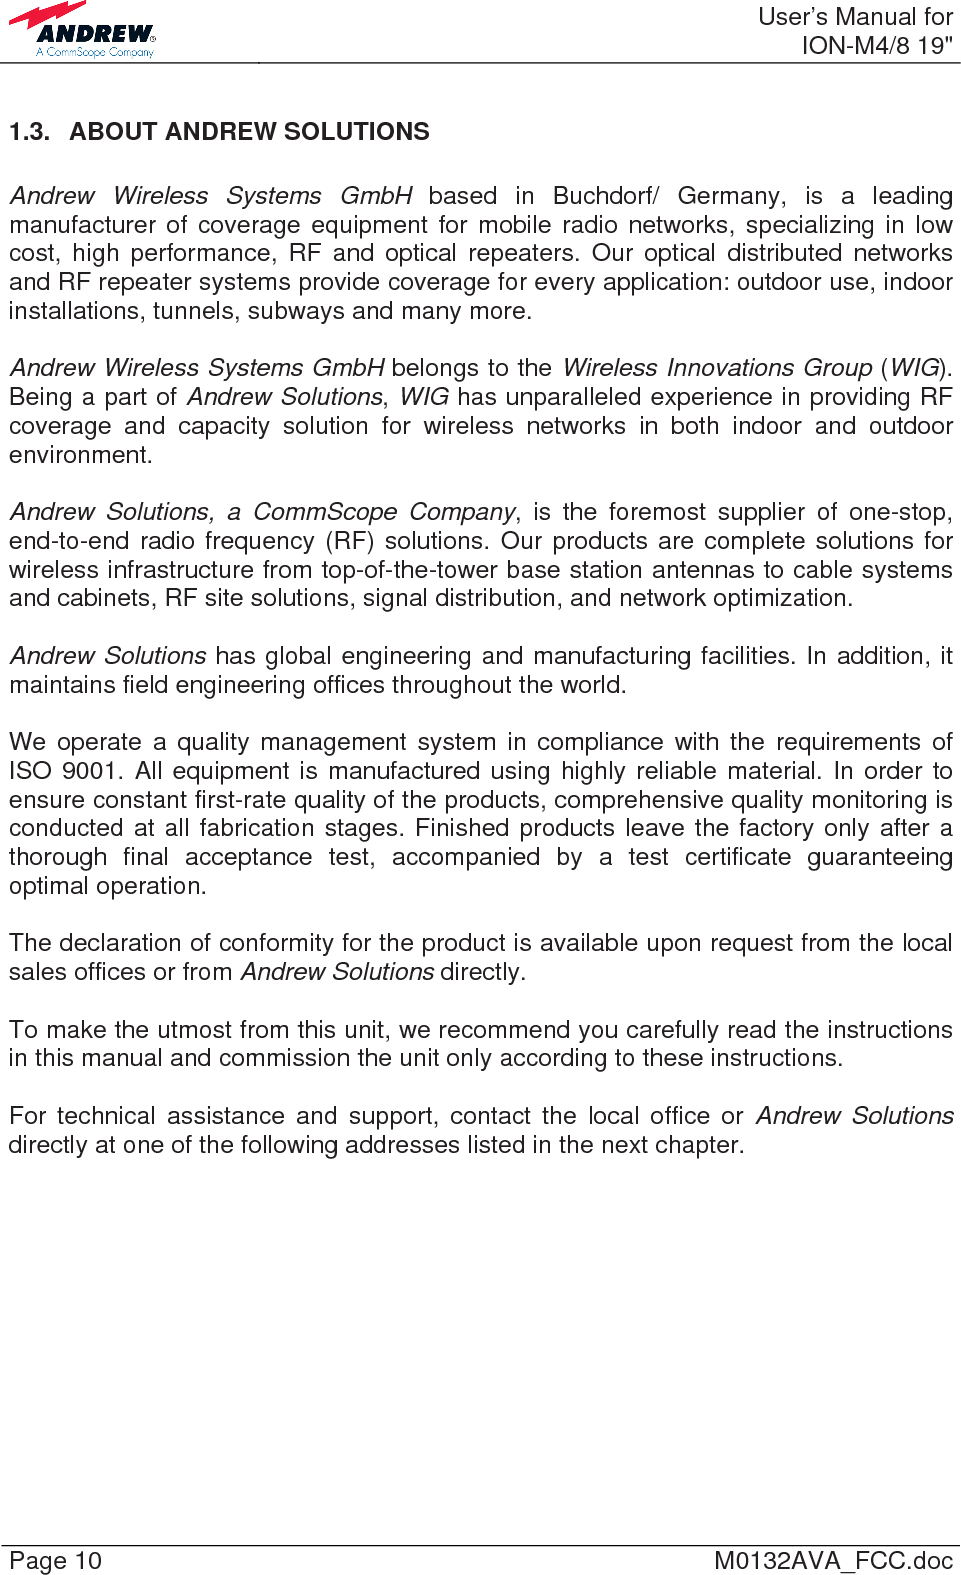  User’s Manual forION-M4/8 19&quot; Page 10  M0132AVA_FCC.doc 1.3.  ABOUT ANDREW SOLUTIONS  Andrew Wireless Systems GmbH based in Buchdorf/ Germany, is a leading manufacturer of coverage equipment for mobile radio networks, specializing in low cost, high performance, RF and optical repeaters. Our optical distributed networks and RF repeater systems provide coverage for every application: outdoor use, indoor installations, tunnels, subways and many more.  Andrew Wireless Systems GmbH belongs to the Wireless Innovations Group (WIG). Being a part of Andrew Solutions, WIG has unparalleled experience in providing RF coverage and capacity solution for wireless networks in both indoor and outdoor environment.  Andrew Solutions, a CommScope Company, is the foremost supplier of one-stop, end-to-end radio frequency (RF) solutions. Our products are complete solutions for wireless infrastructure from top-of-the-tower base station antennas to cable systems and cabinets, RF site solutions, signal distribution, and network optimization.  Andrew Solutions has global engineering and manufacturing facilities. In addition, it maintains field engineering offices throughout the world.  We operate a quality management system in compliance with the requirements of ISO 9001. All equipment is manufactured using highly reliable material. In order to ensure constant first-rate quality of the products, comprehensive quality monitoring is conducted at all fabrication stages. Finished products leave the factory only after a thorough final acceptance test, accompanied by a test certificate guaranteeing optimal operation.  The declaration of conformity for the product is available upon request from the local sales offices or from Andrew Solutions directly.  To make the utmost from this unit, we recommend you carefully read the instructions in this manual and commission the unit only according to these instructions.  For technical assistance and support, contact the local office or Andrew Solutions directly at one of the following addresses listed in the next chapter.    